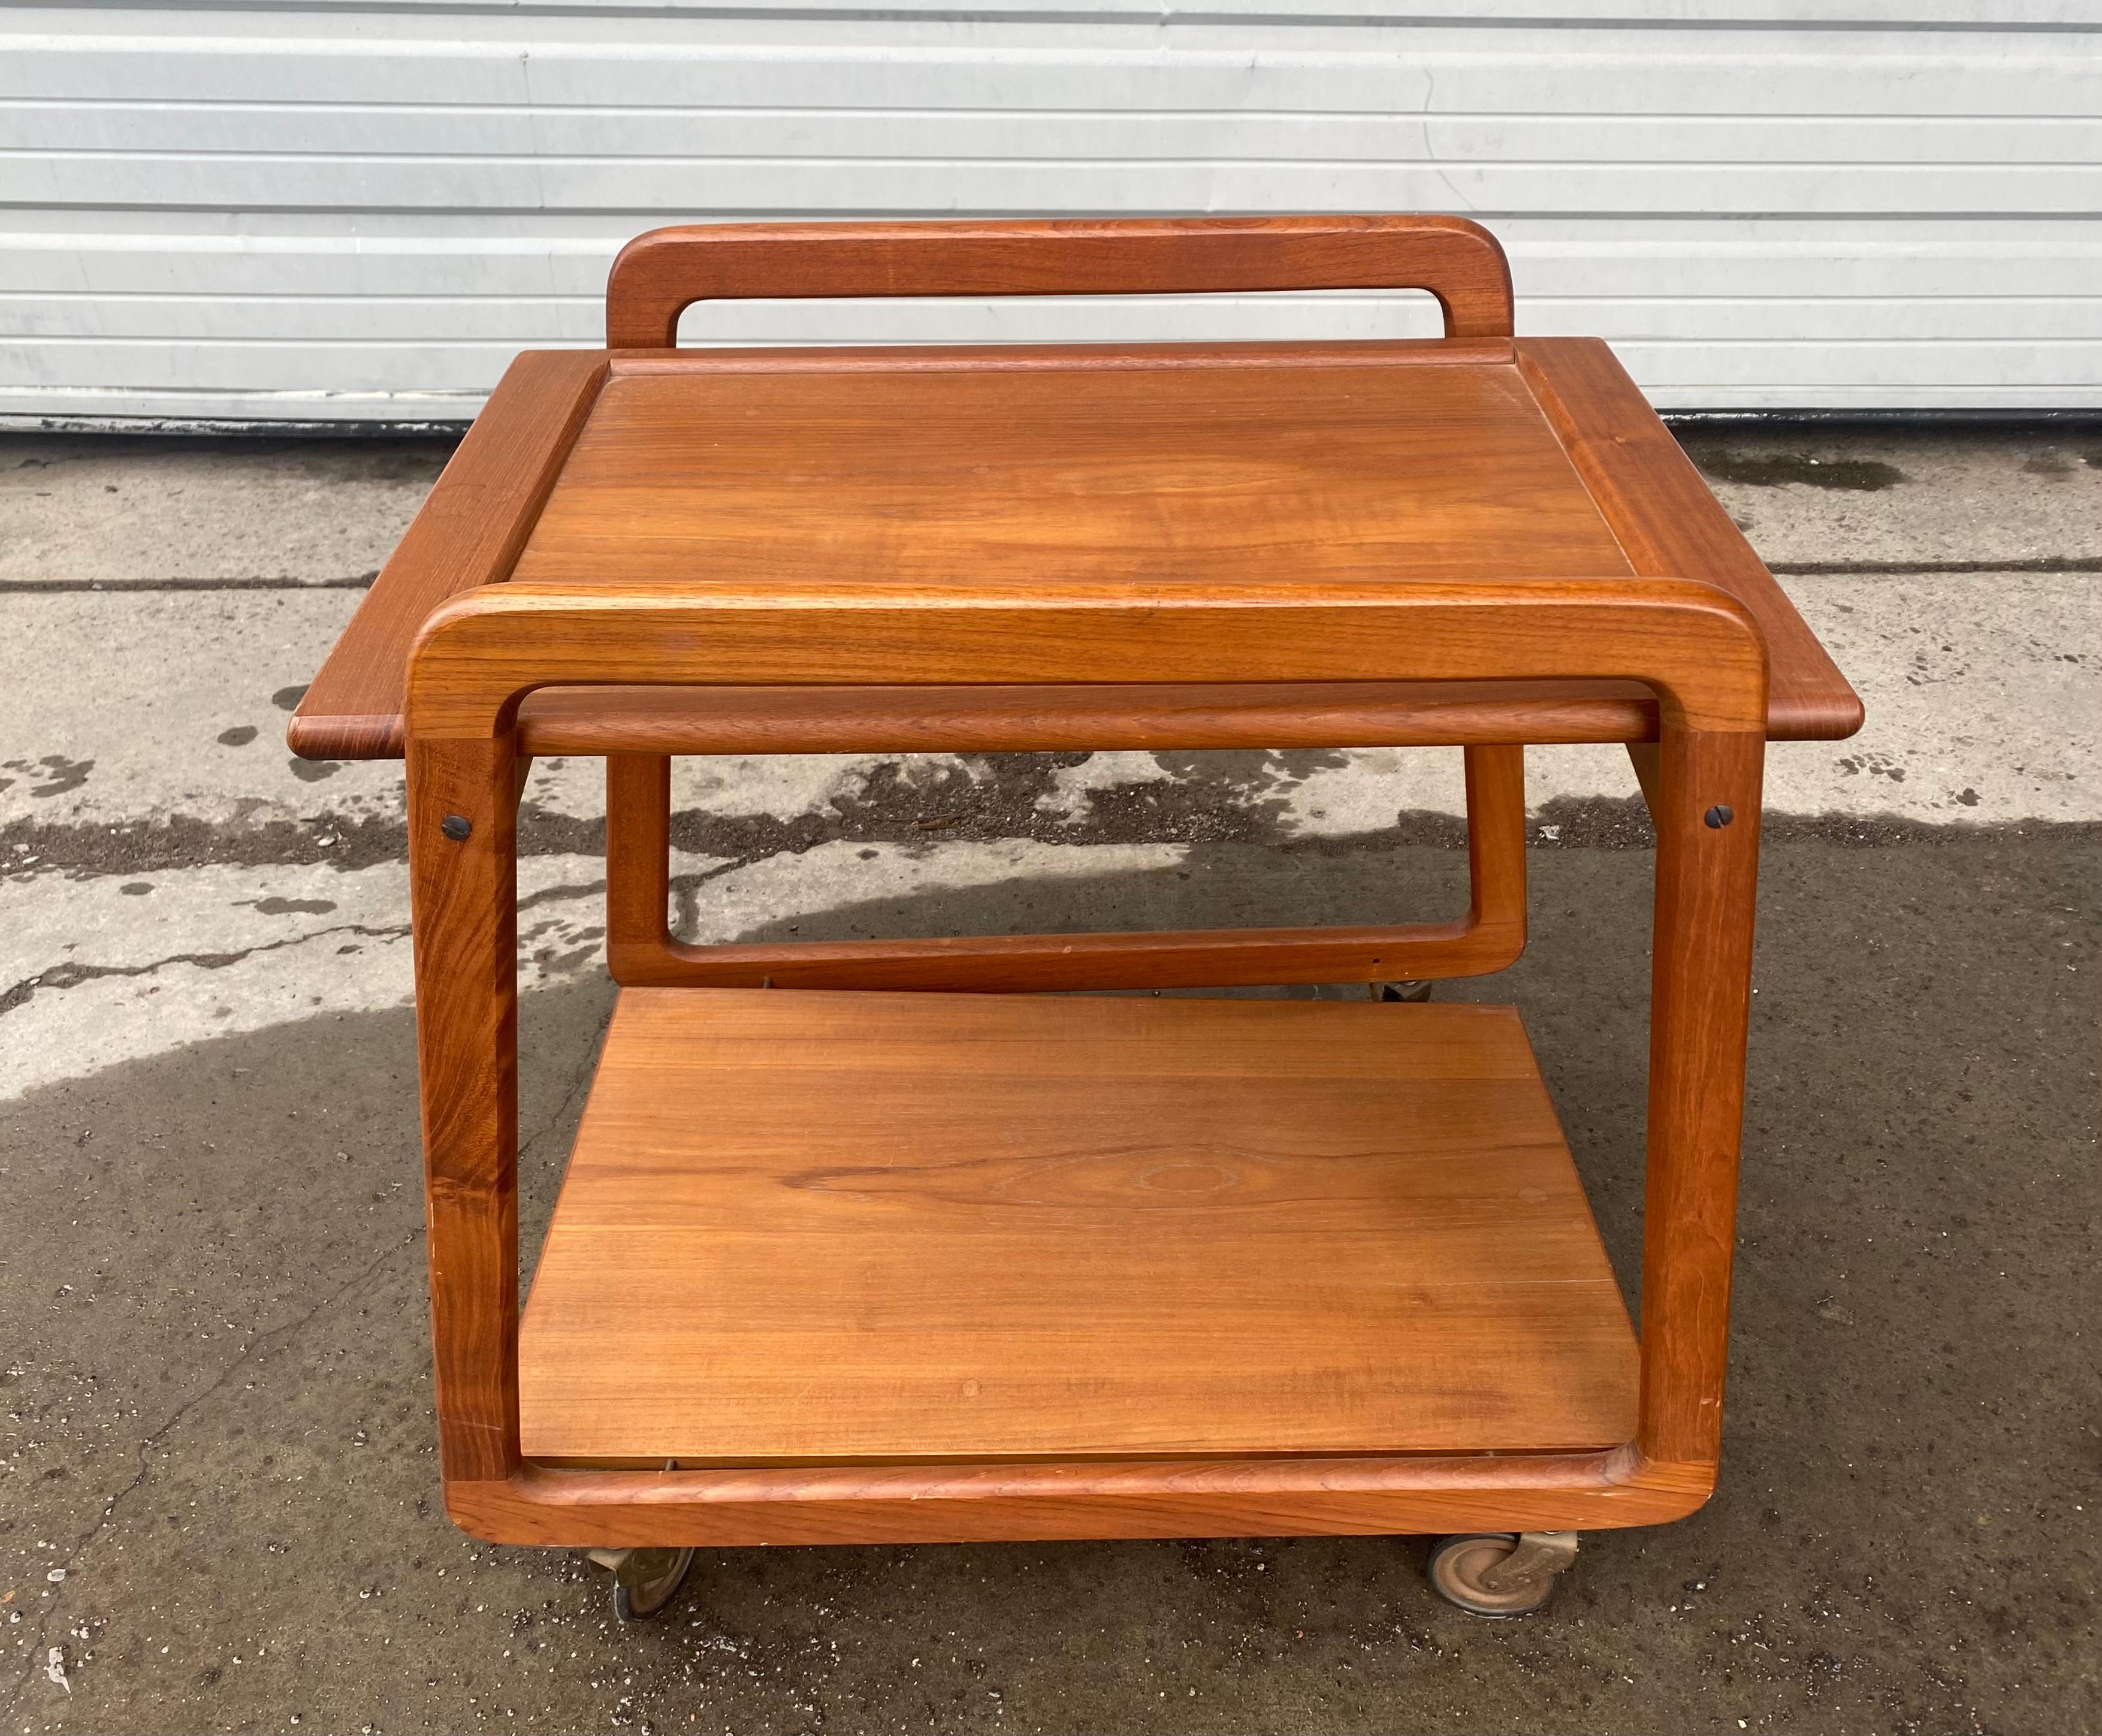 Mid-20th Century Teak Reversible Tray Top Bar Cart or Tea Trolley by Sika Mobler, Denmark For Sale